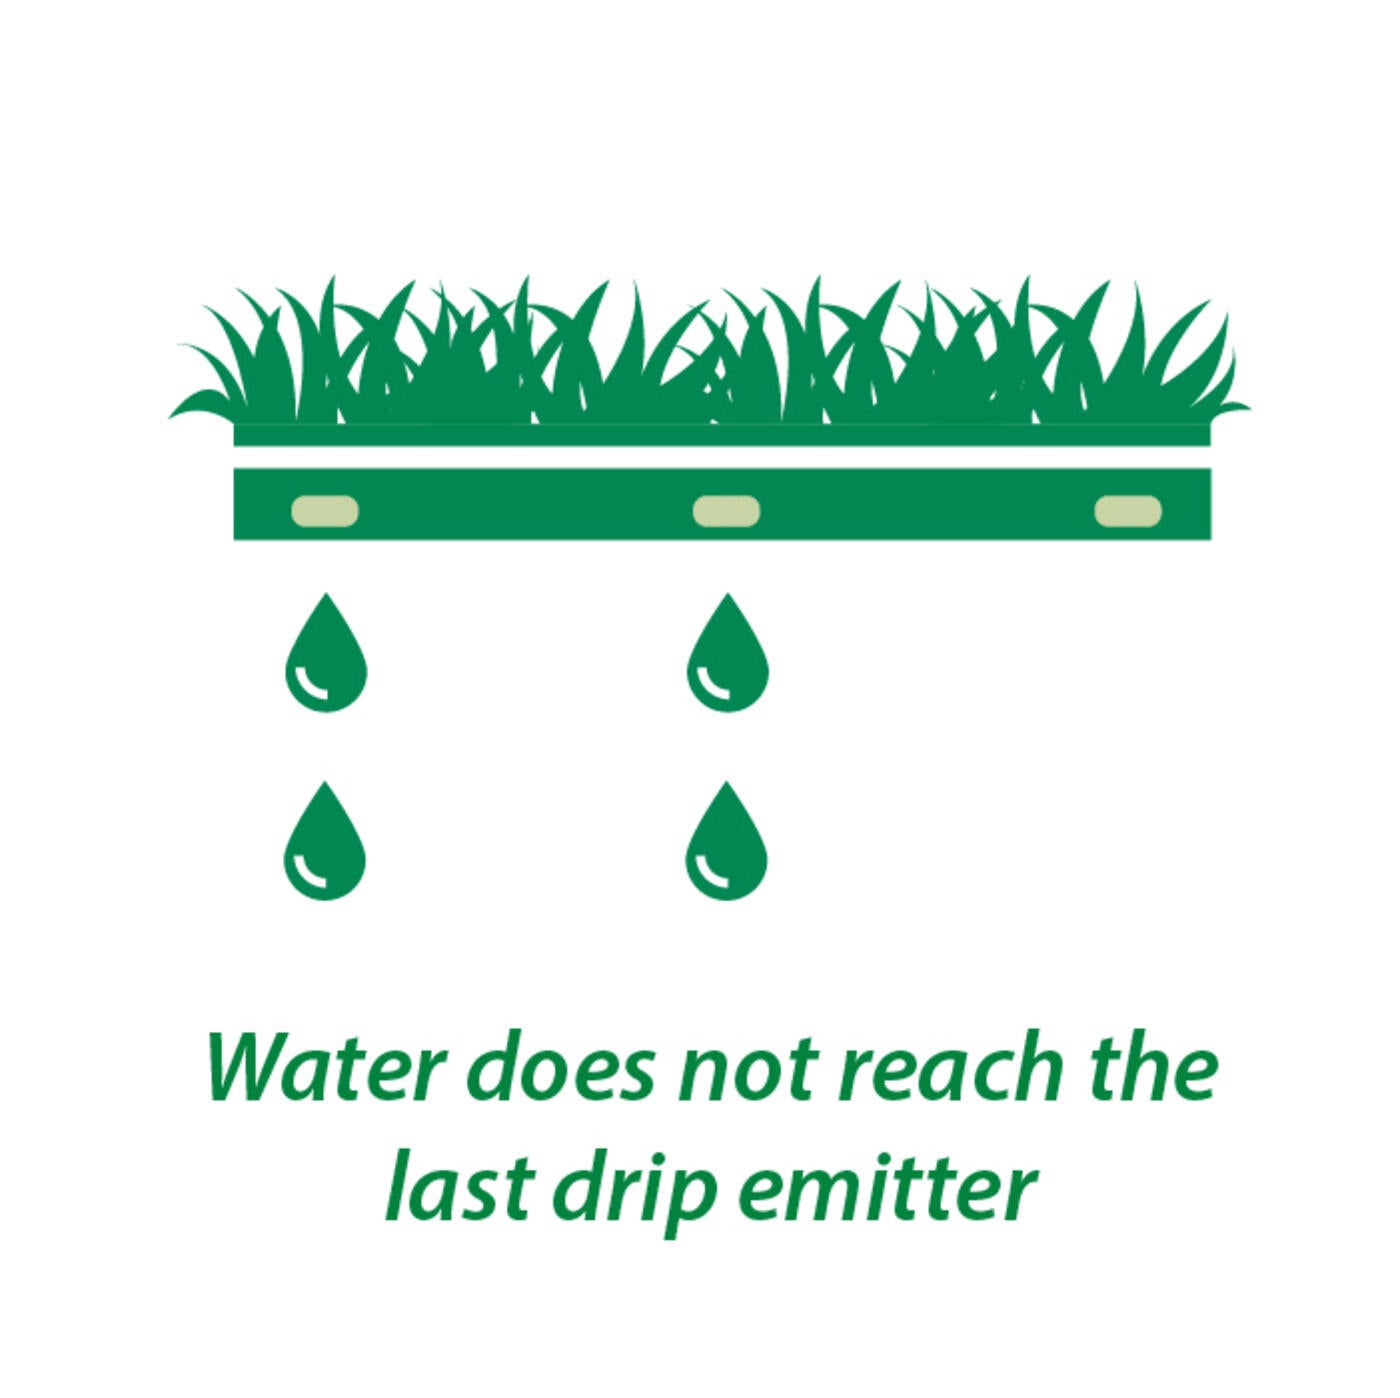 VFD - Water does not reach the last drip emitter